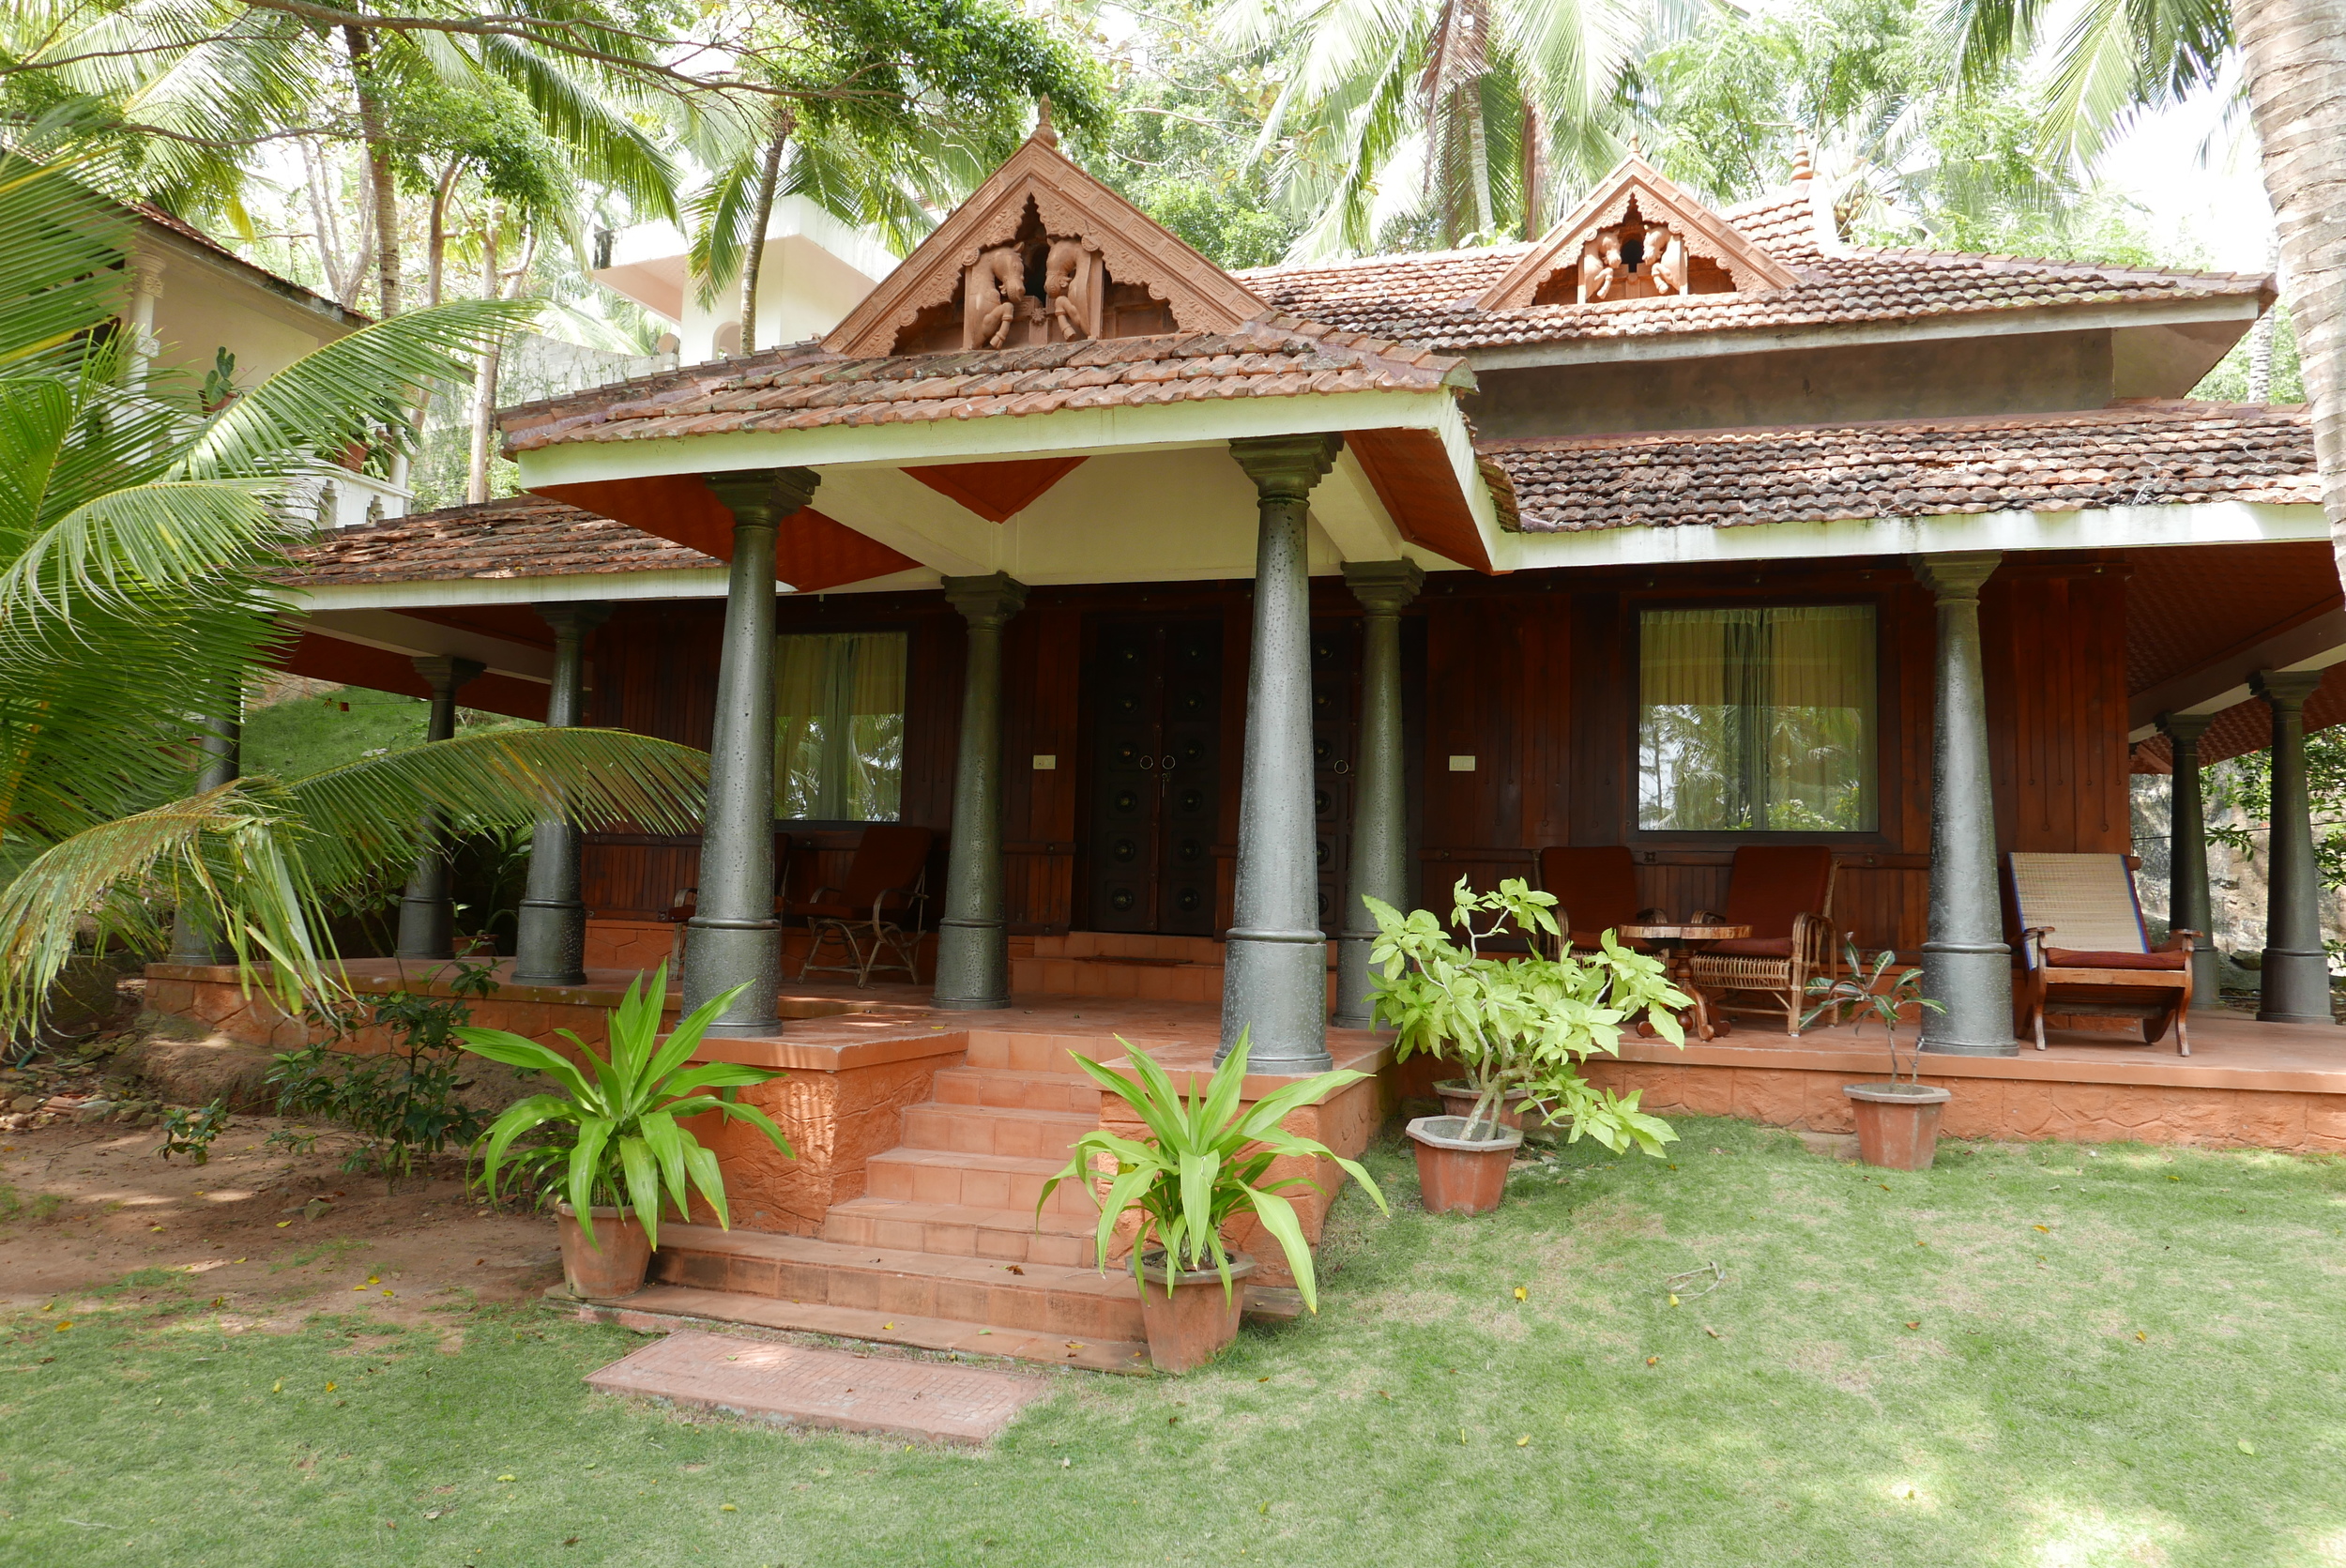 Kerala Traditional House Images Stock Photos Vectors Shutterstock